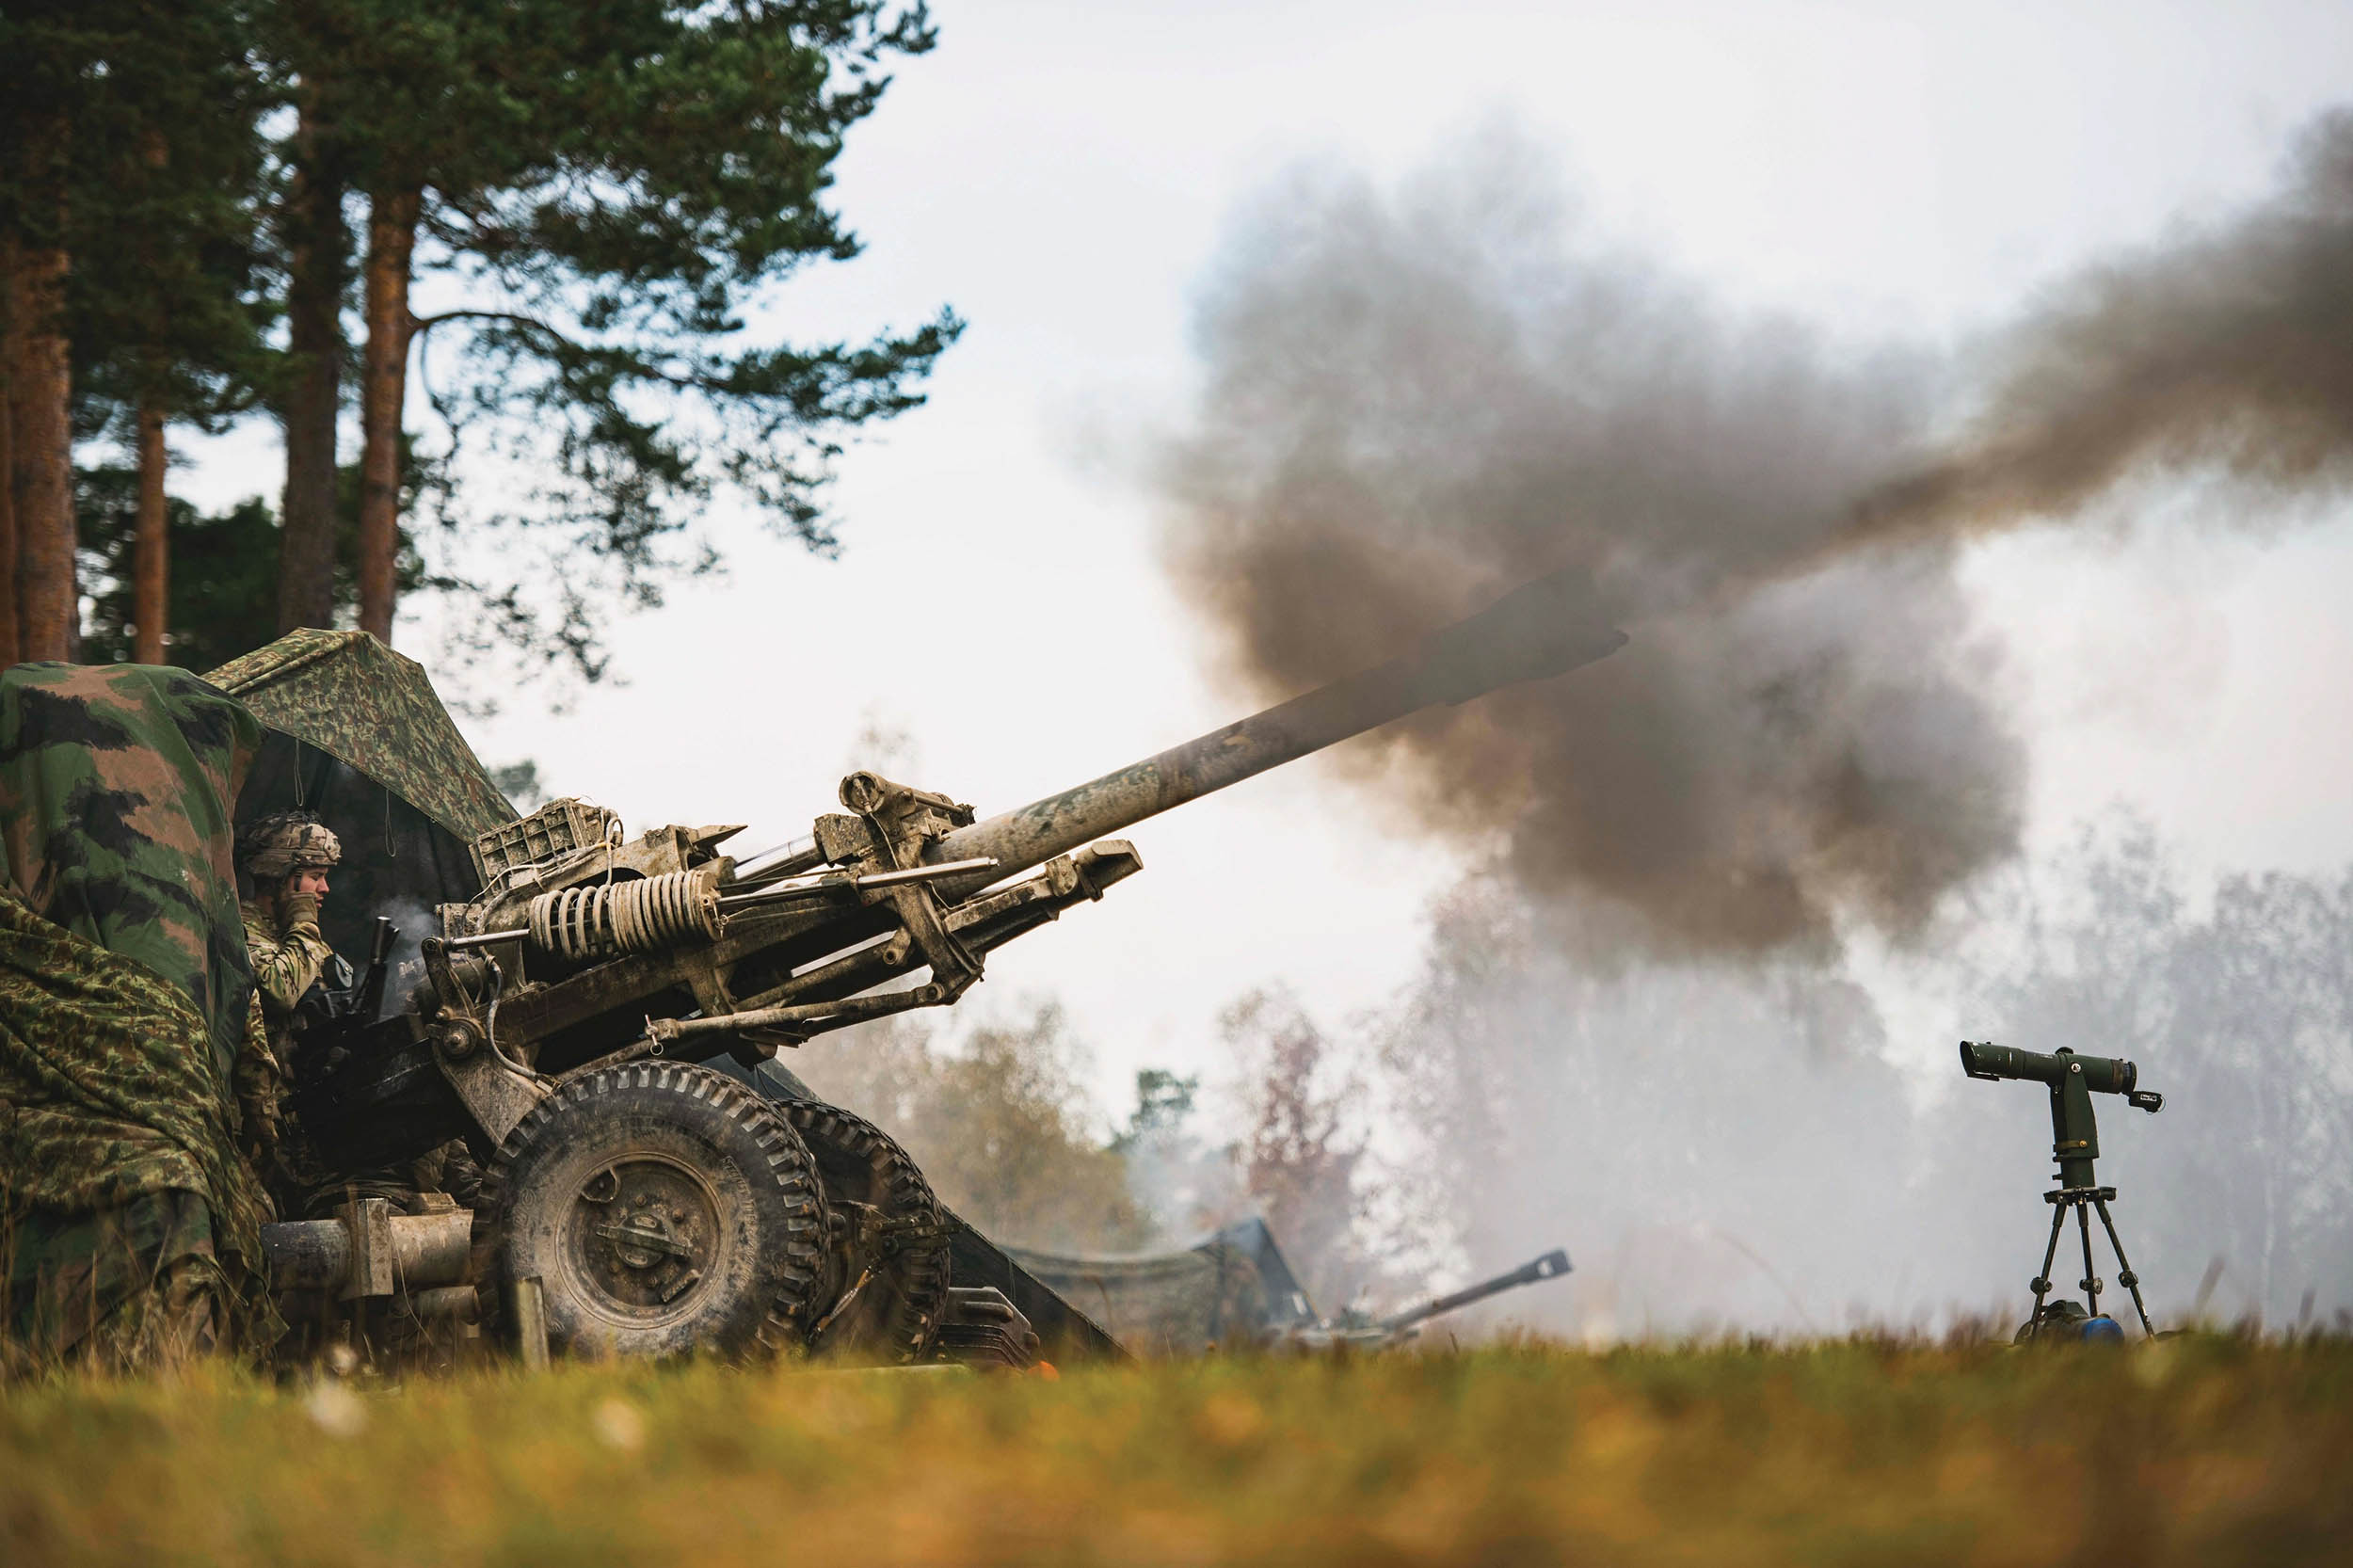 Army paratroopers assigned to 4th Battalion, 319th Airborne Field Artillery Regiment, fire M119A3 Howitzer during field artillery live fire exercise as part of exercise Bayonet Ready 22, at Joint Multinational Training Center, Grafenwoehr Training Area, Germany, October 25, 2021